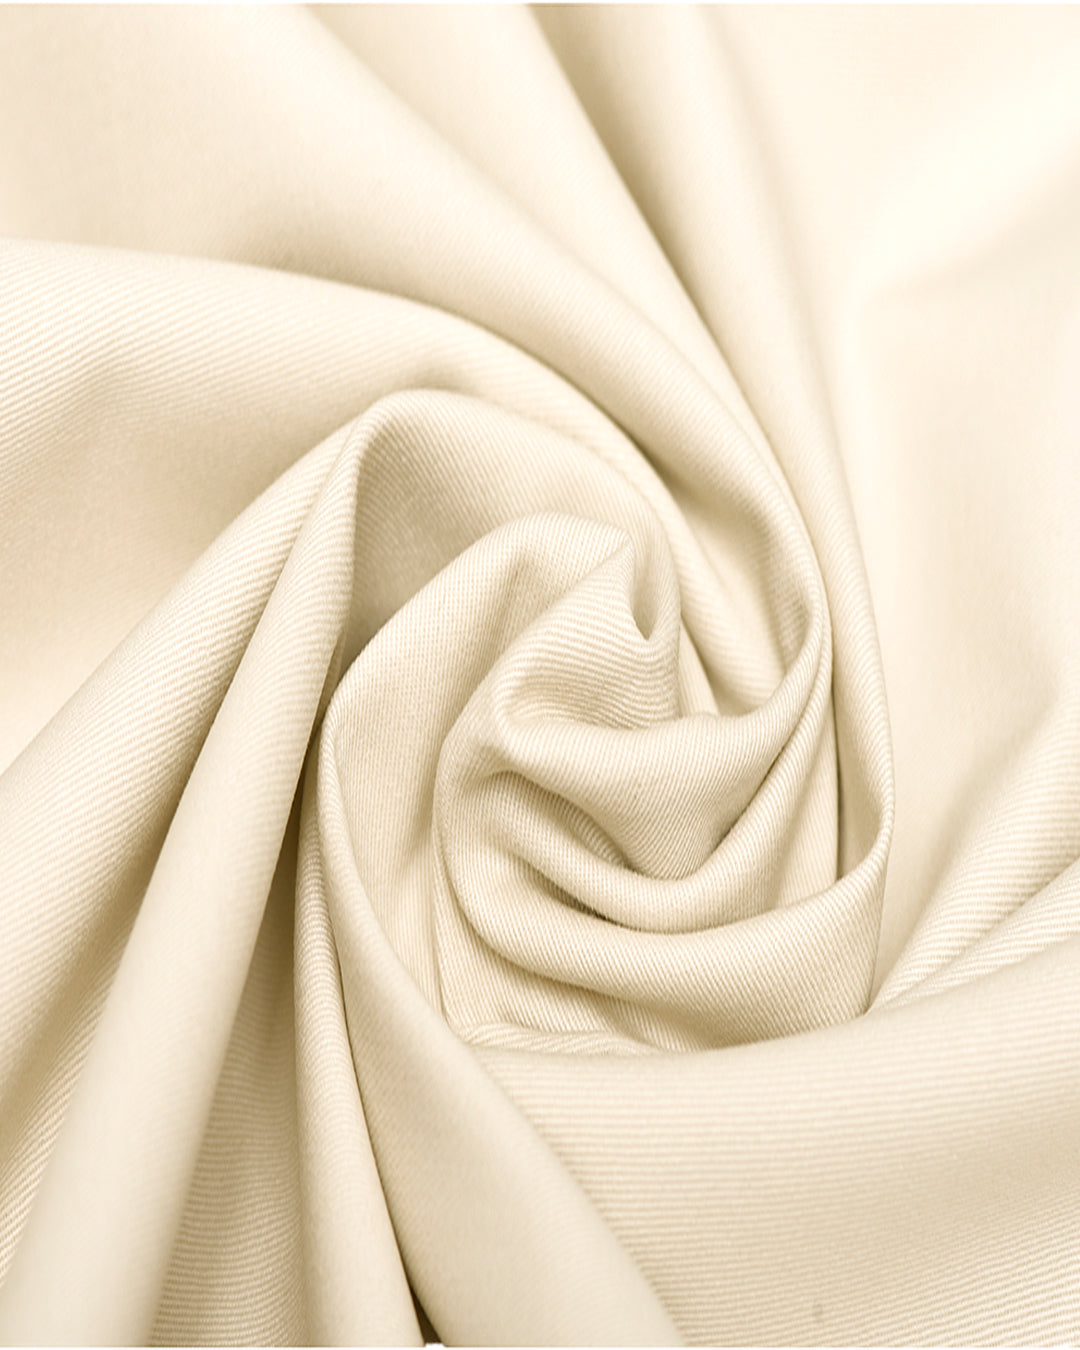 Closeup view of custom Genoa Chino pants for men by Luxire in ivory cream